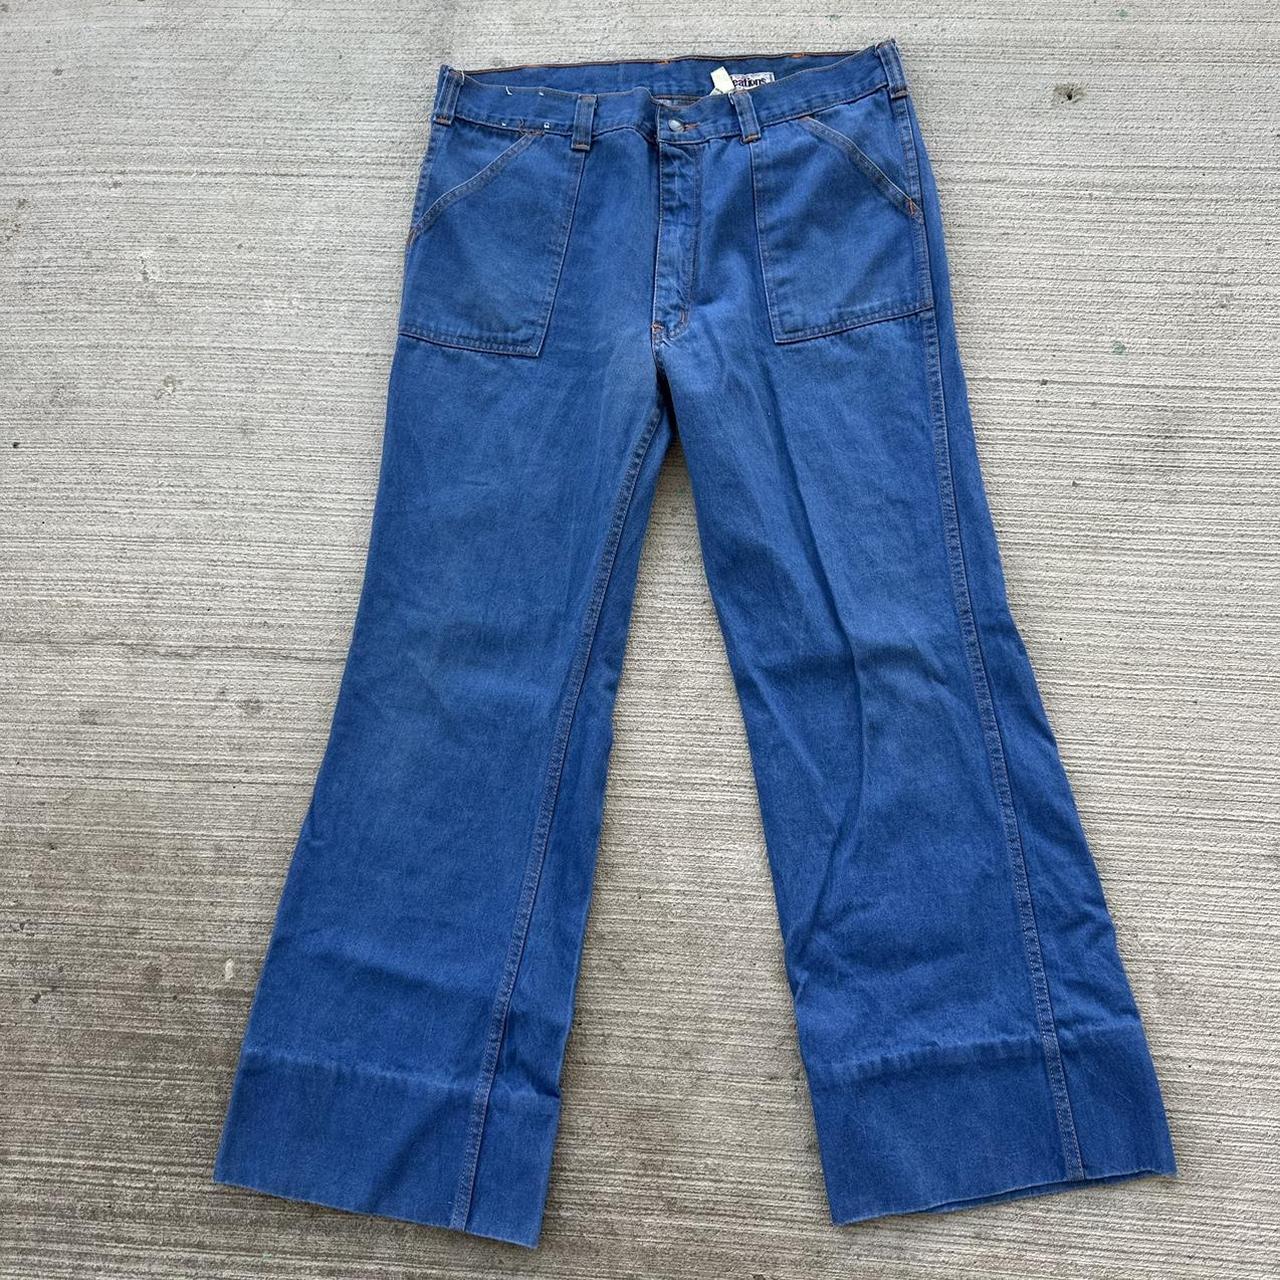 Vintage 70s/80s Bell Bottom Jeans 🧩 ABOUT THE... - Depop